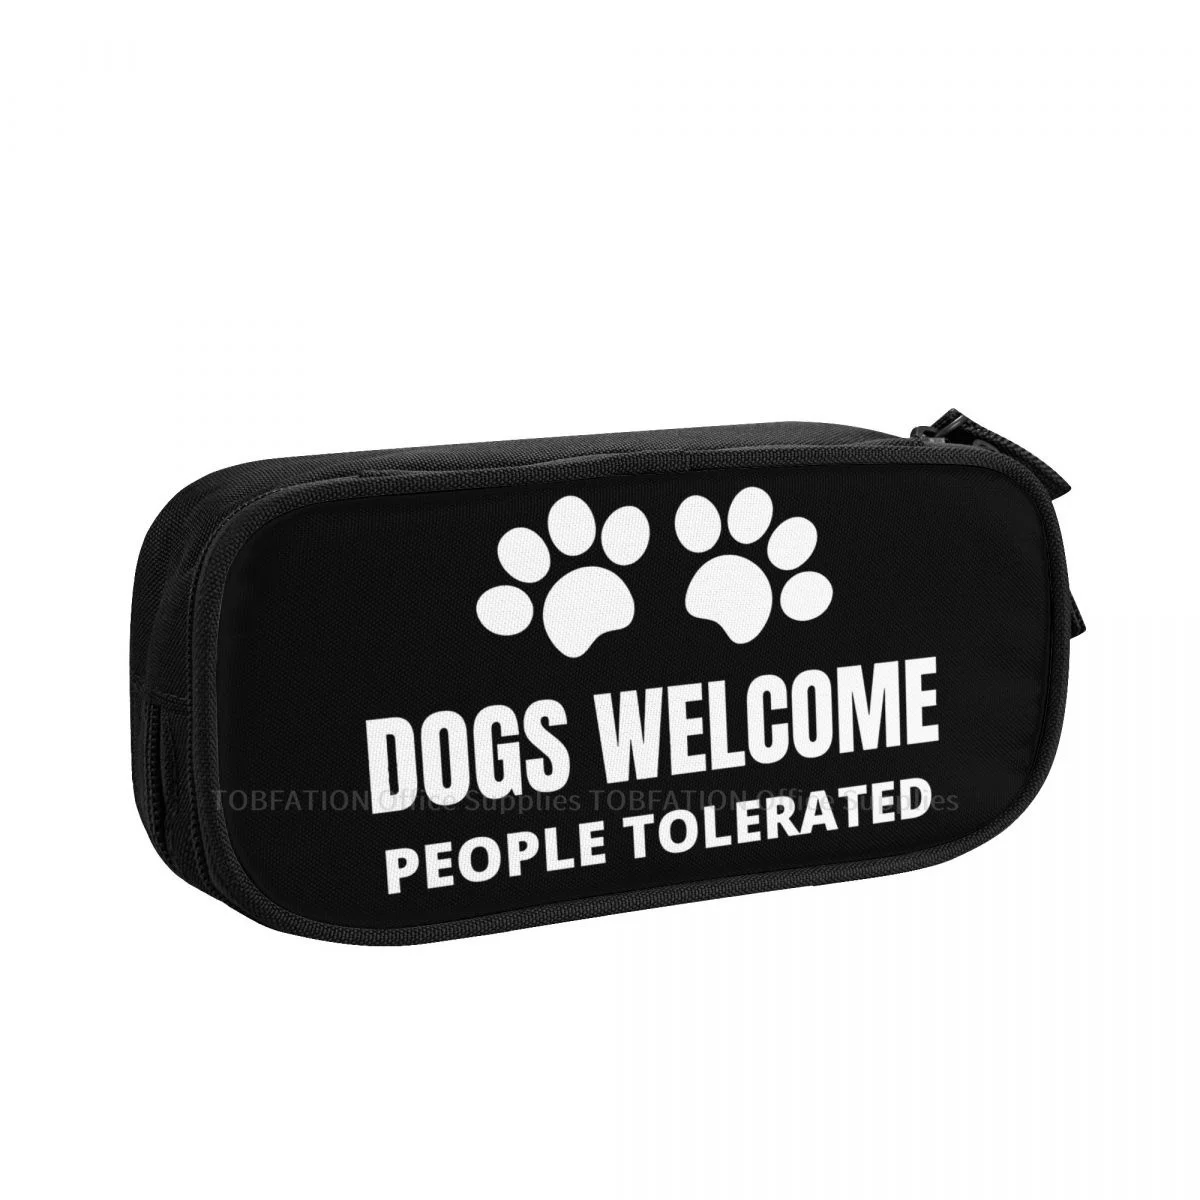 

Dogs Welcome People Tolerated Pencase French Bulldog Pet Pencil Bag Teenage School Storage Supplies Large Capacity Double Zipper